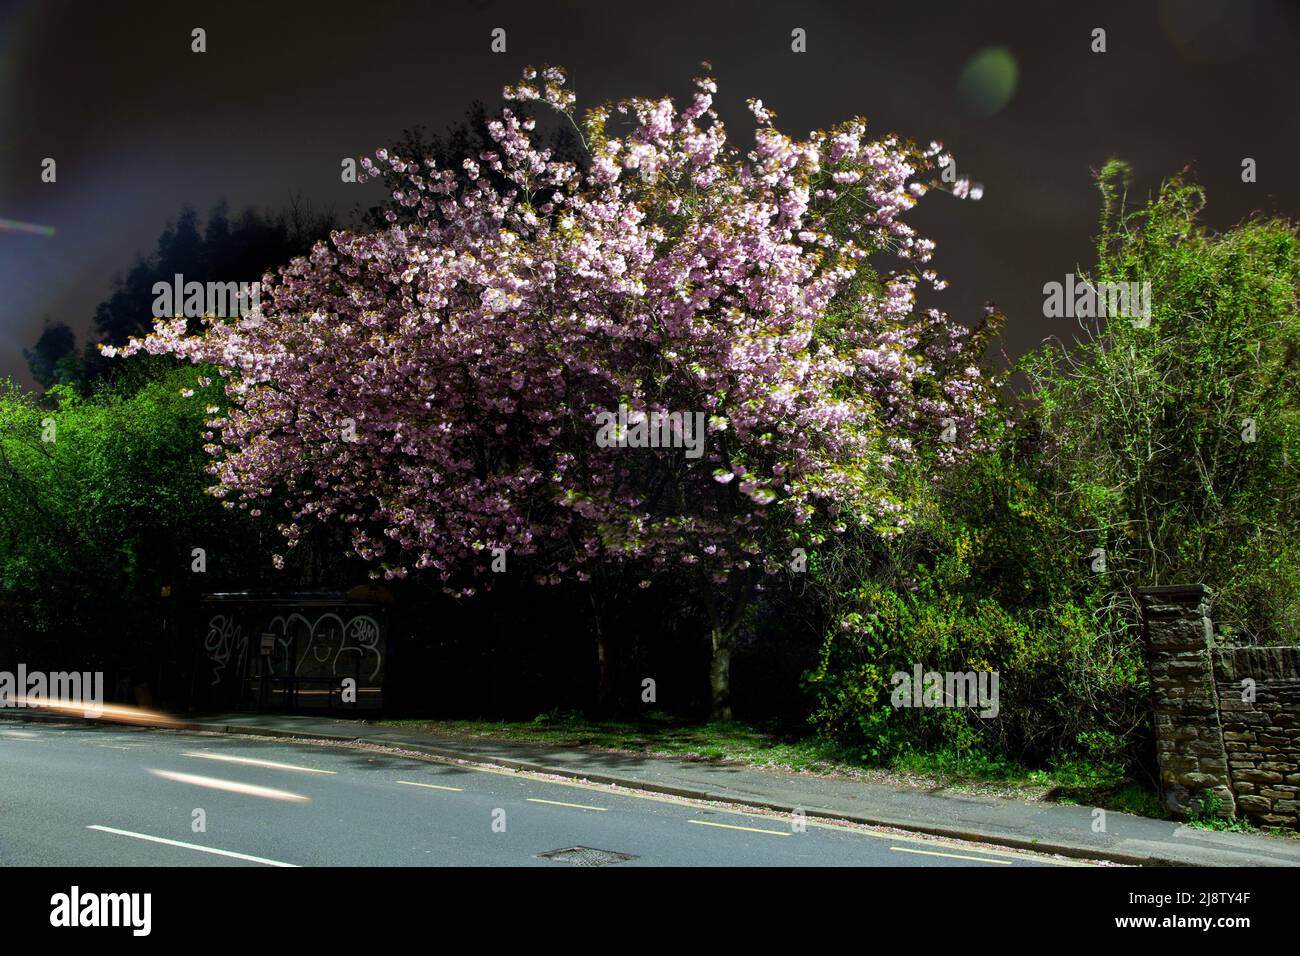 urban street highway view at night with pink blossom on trees with green leaves and bus shelter, UK empty road scene Stock Photo